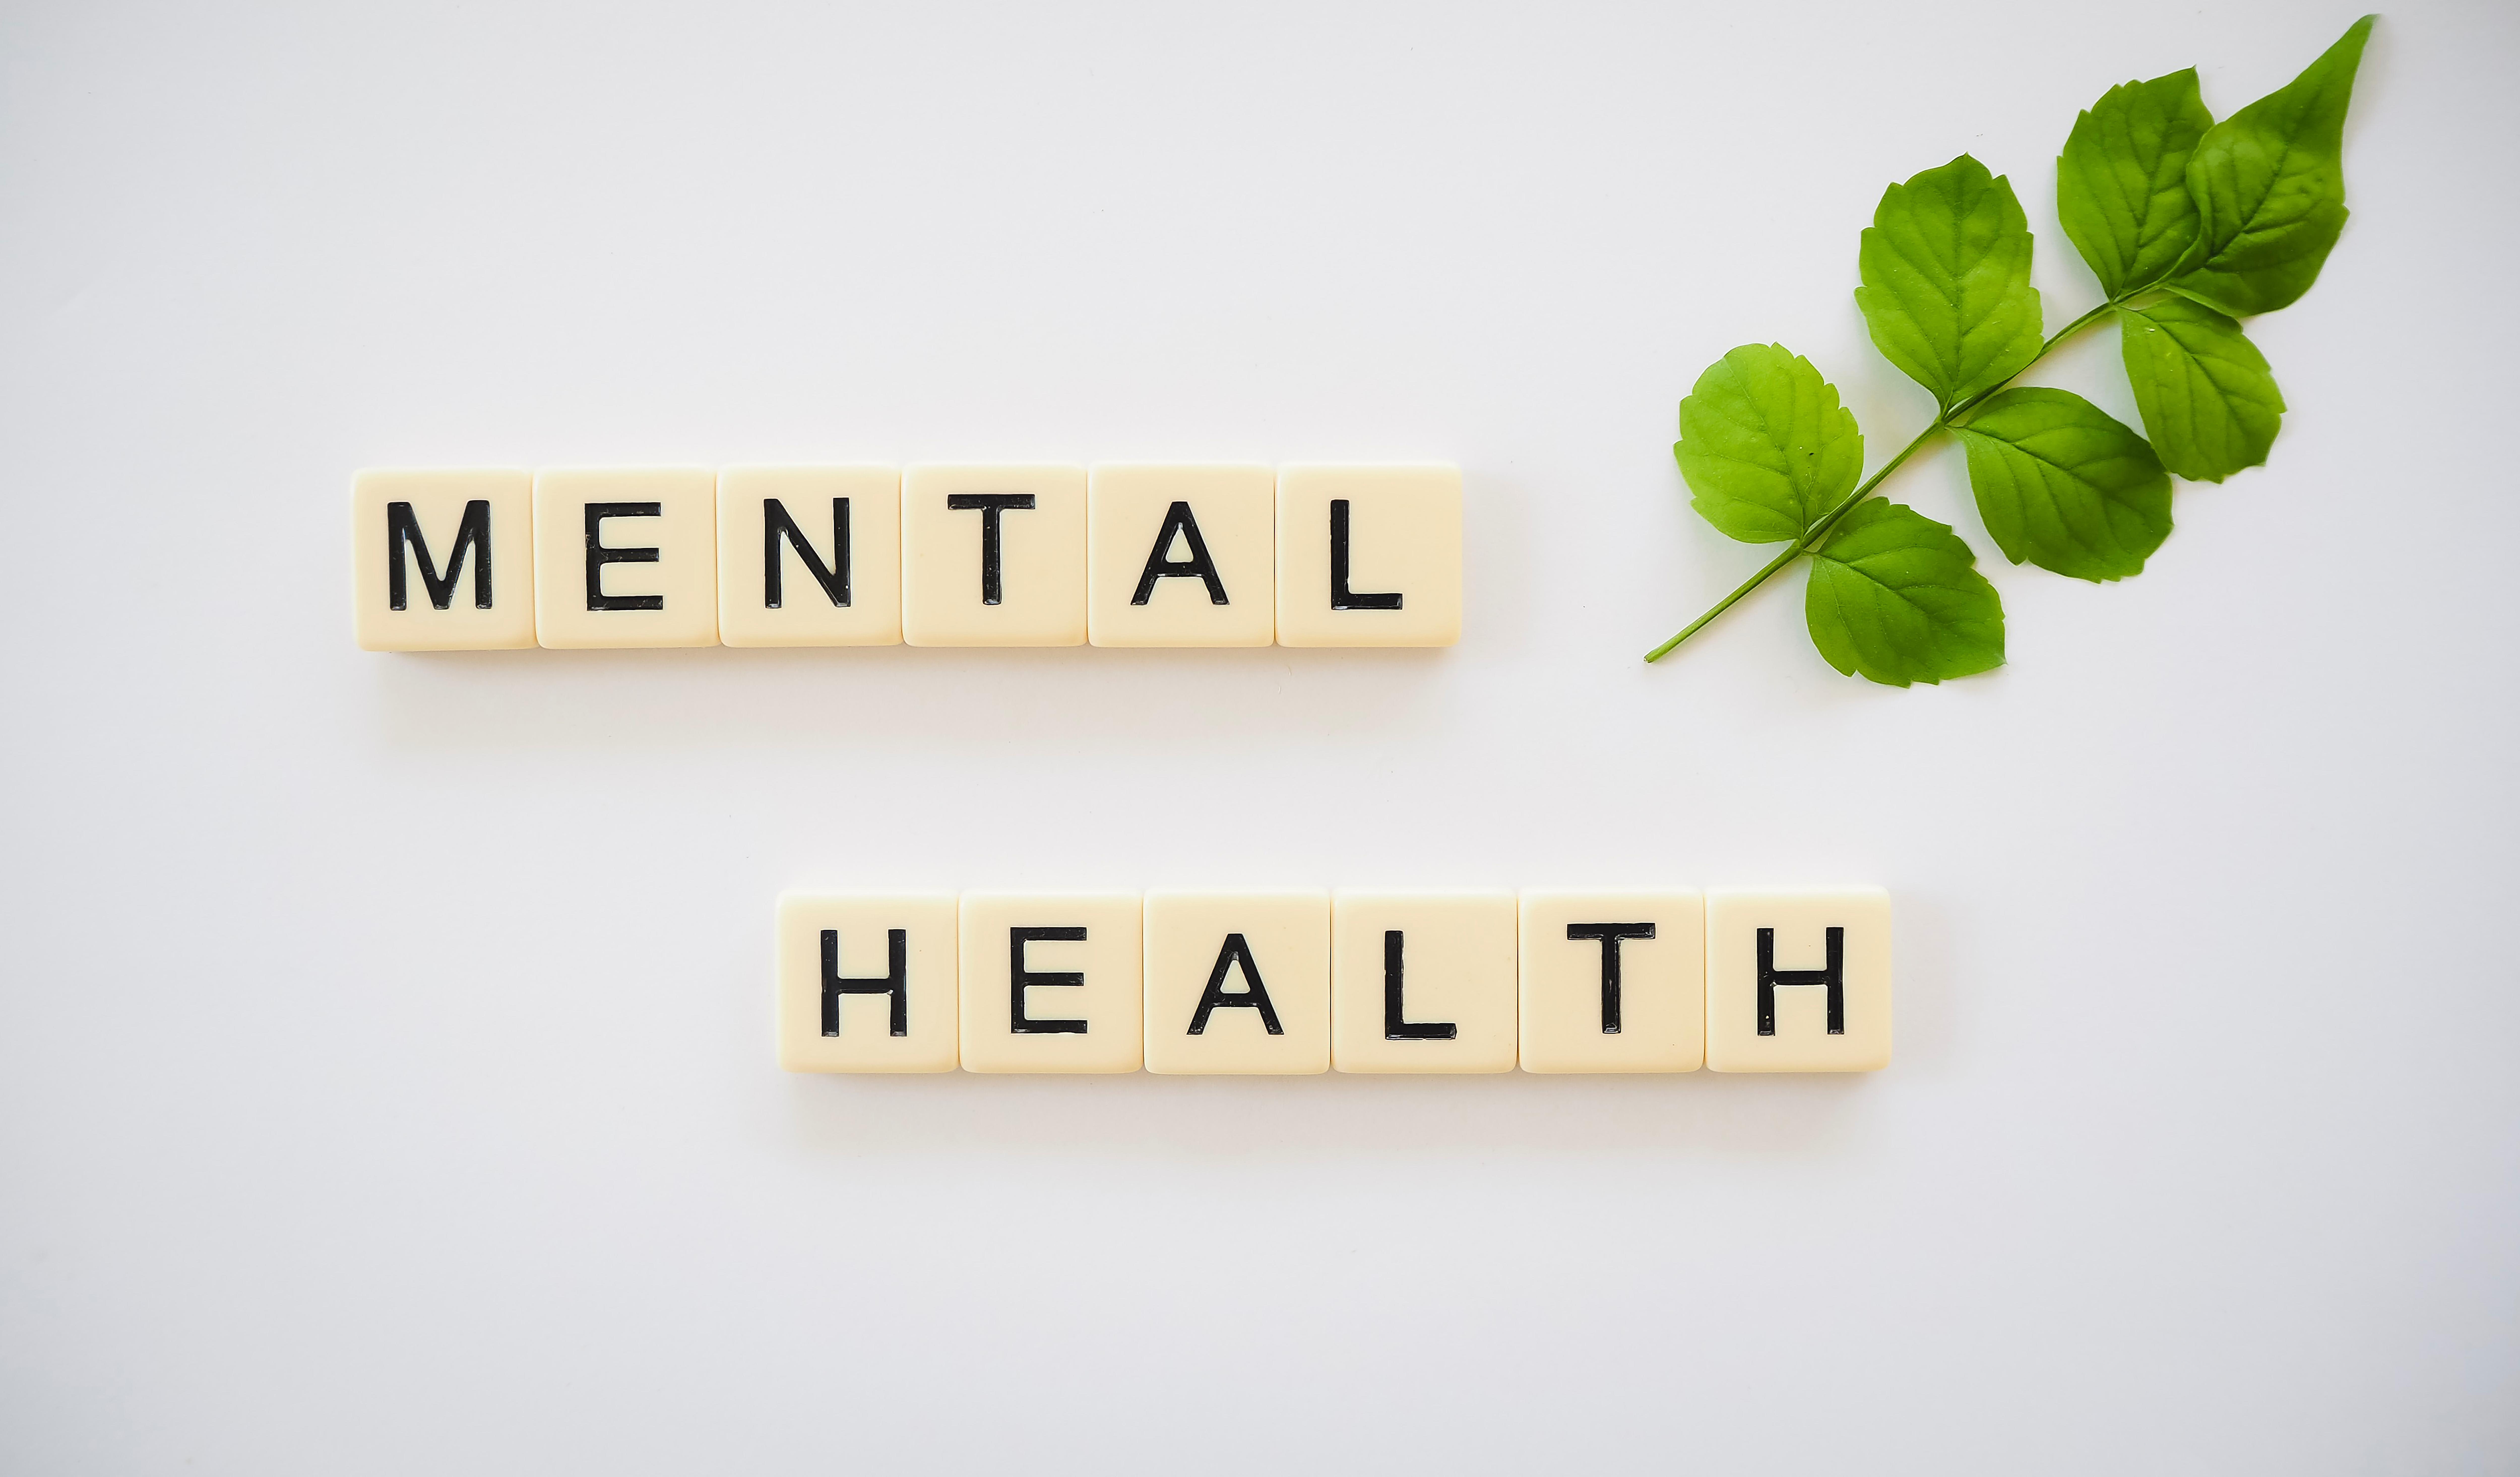 The words 'mental health' spelled out in Scrabble tiles next to some leaves